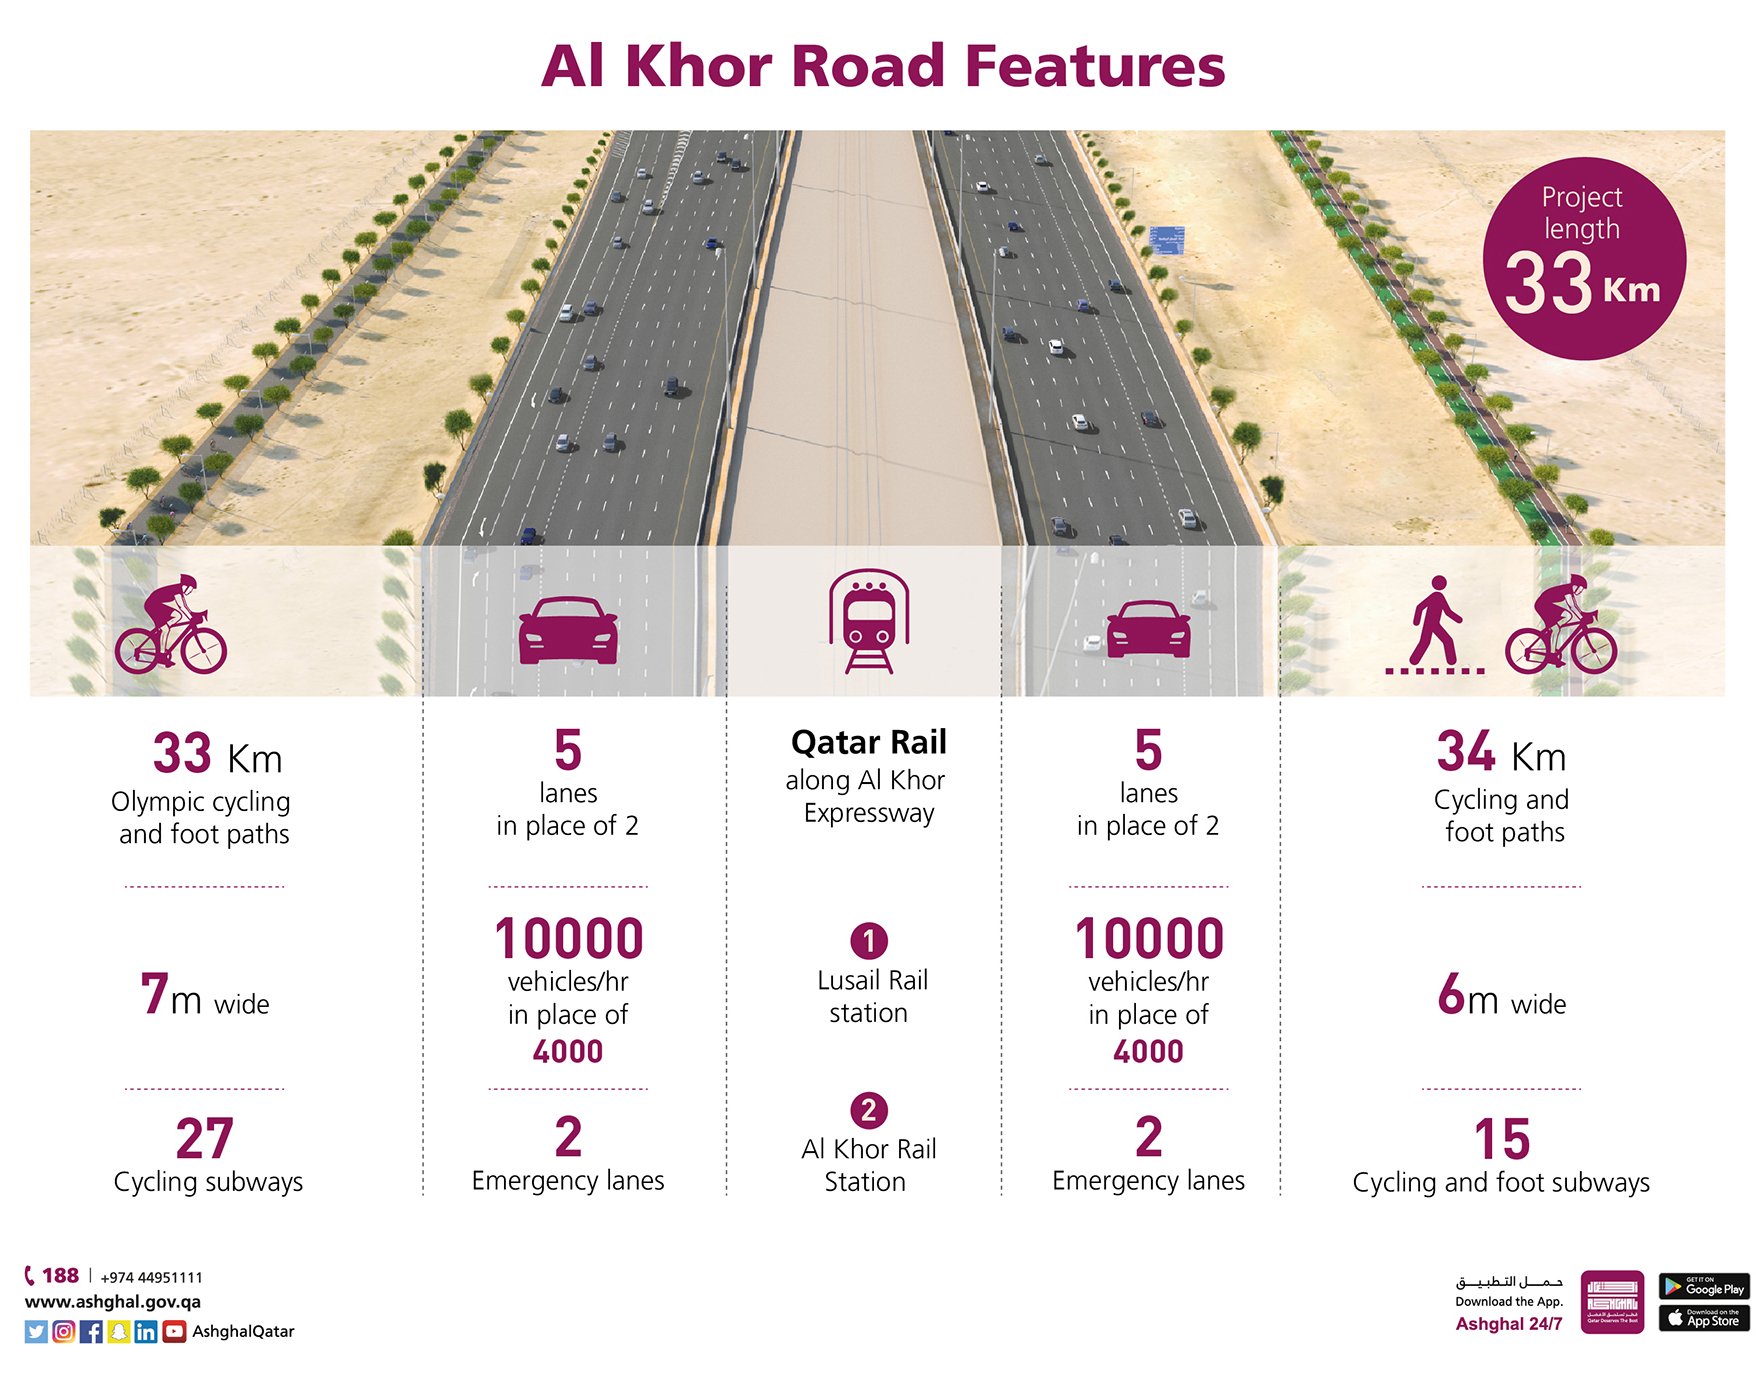 New road connects Al Khor to Doha in 20 minutes